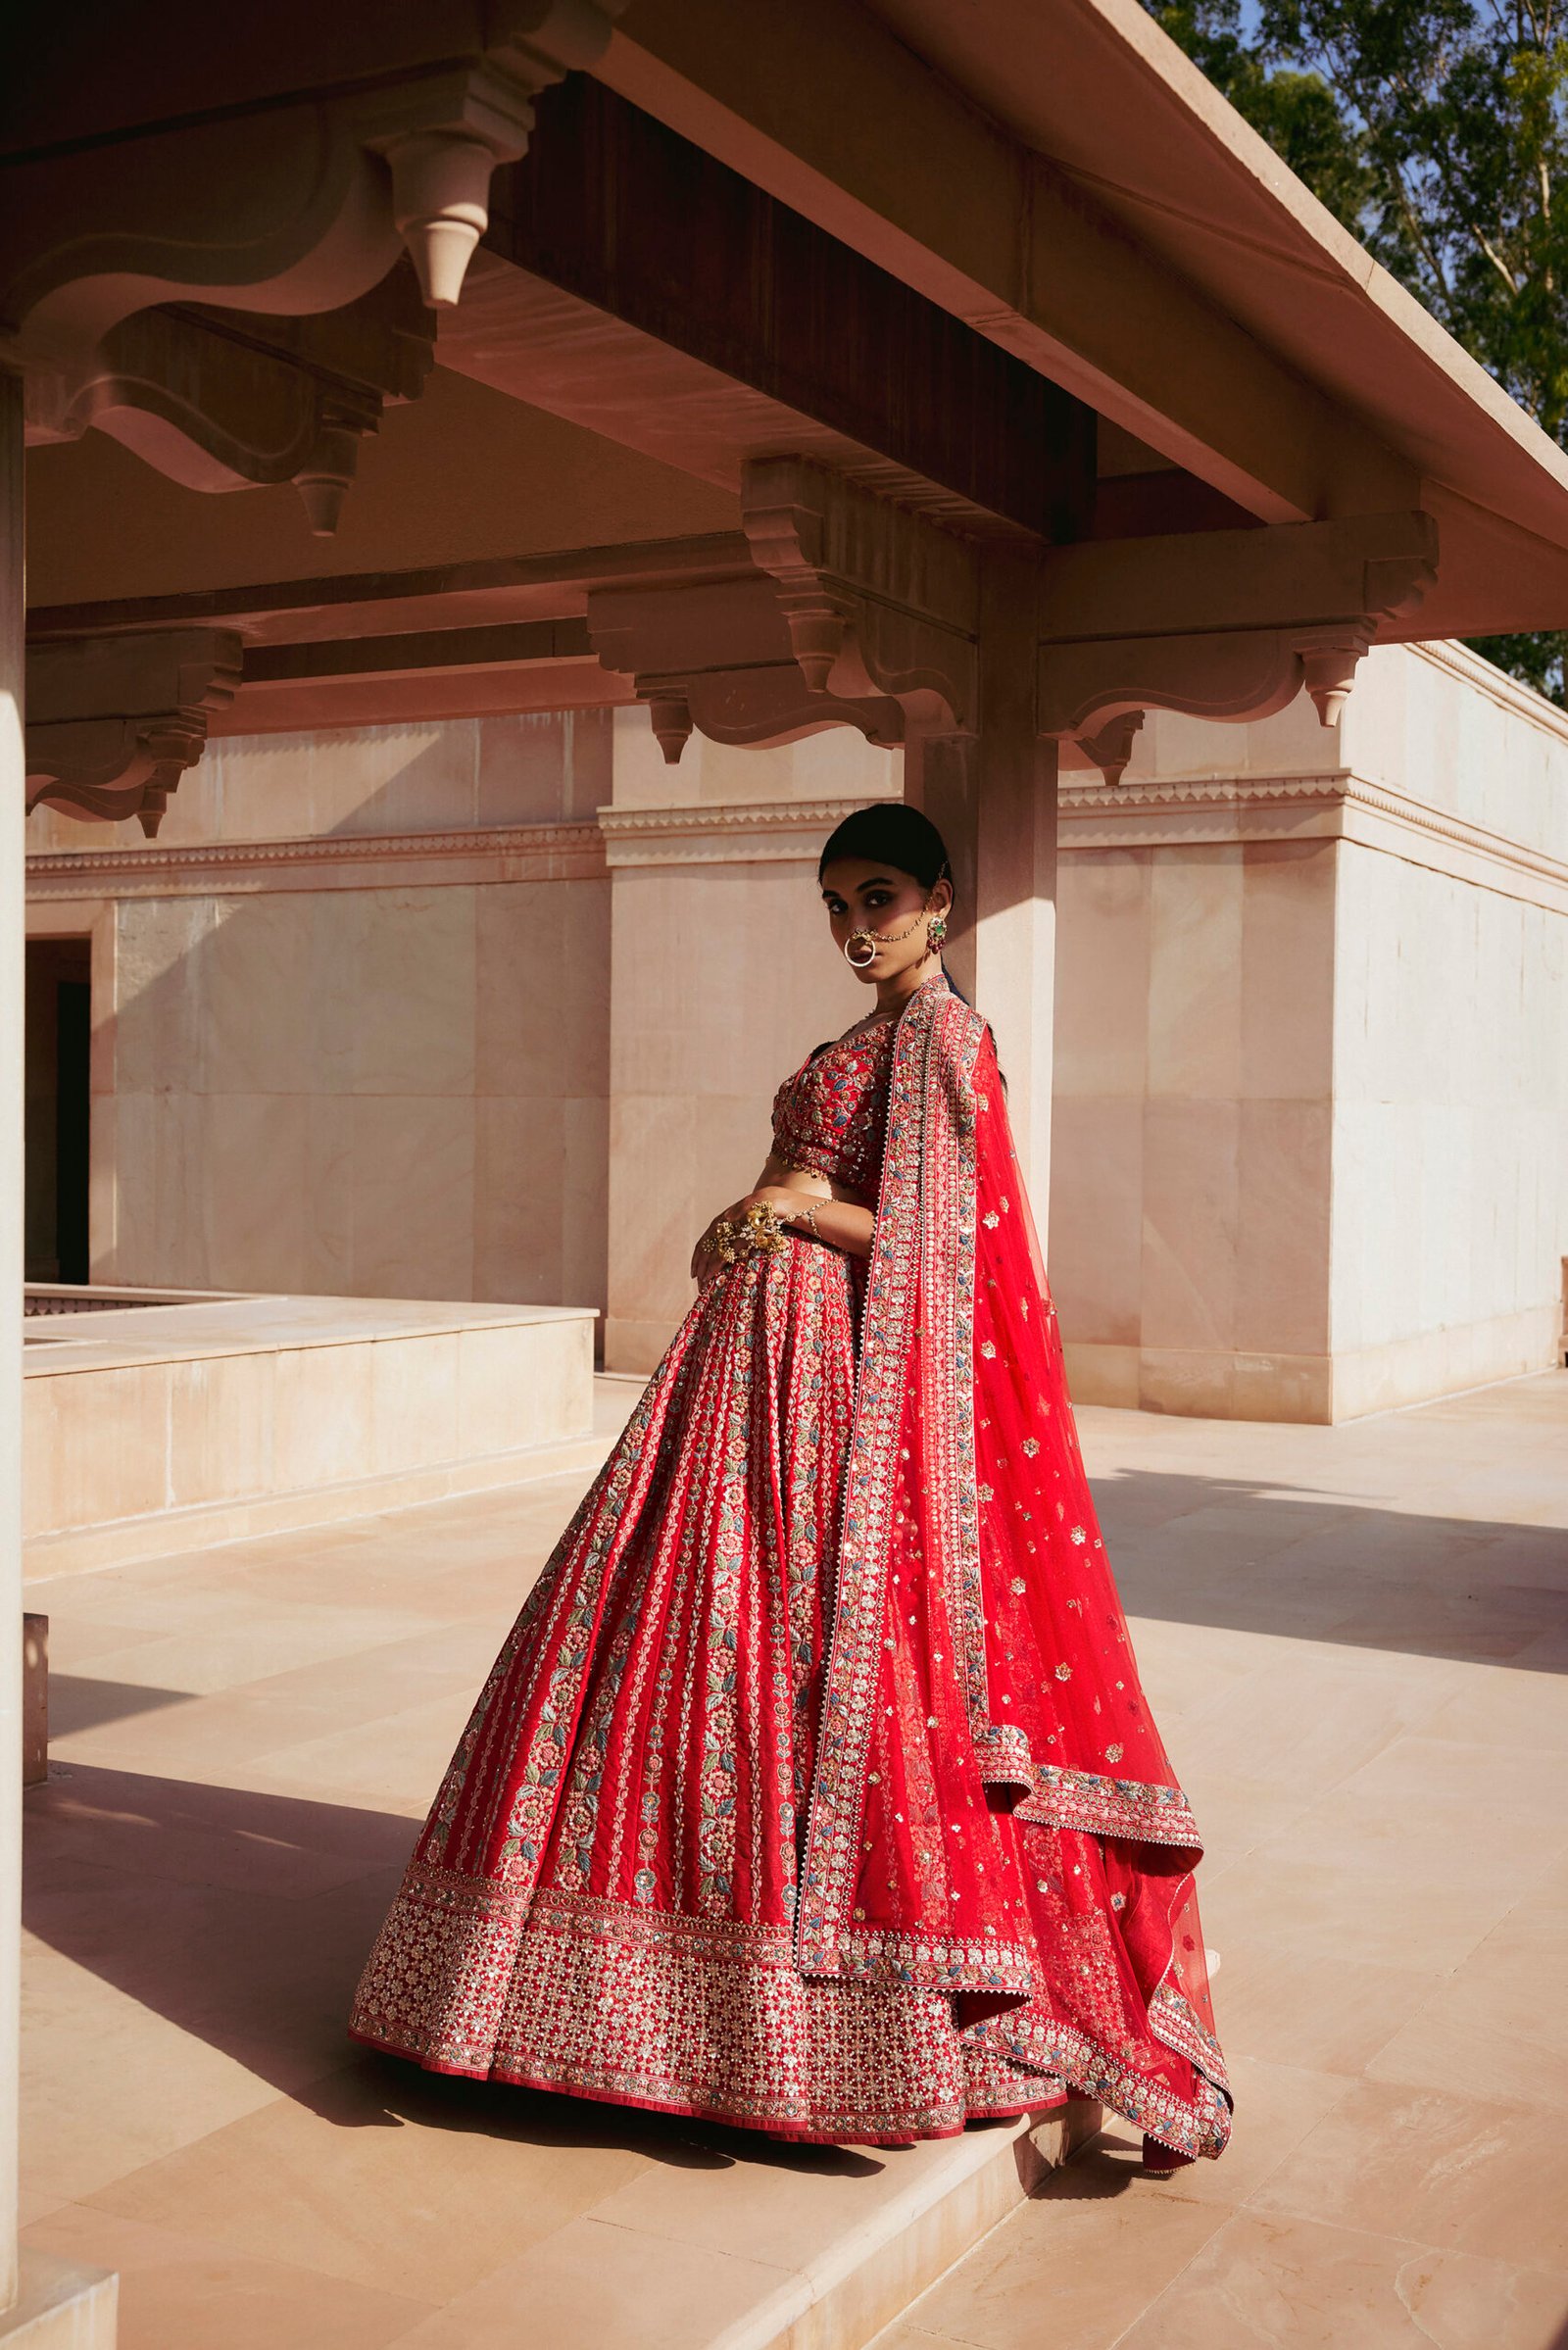 Stunning Anita Dongre Lehengas Spotted On Real Brides